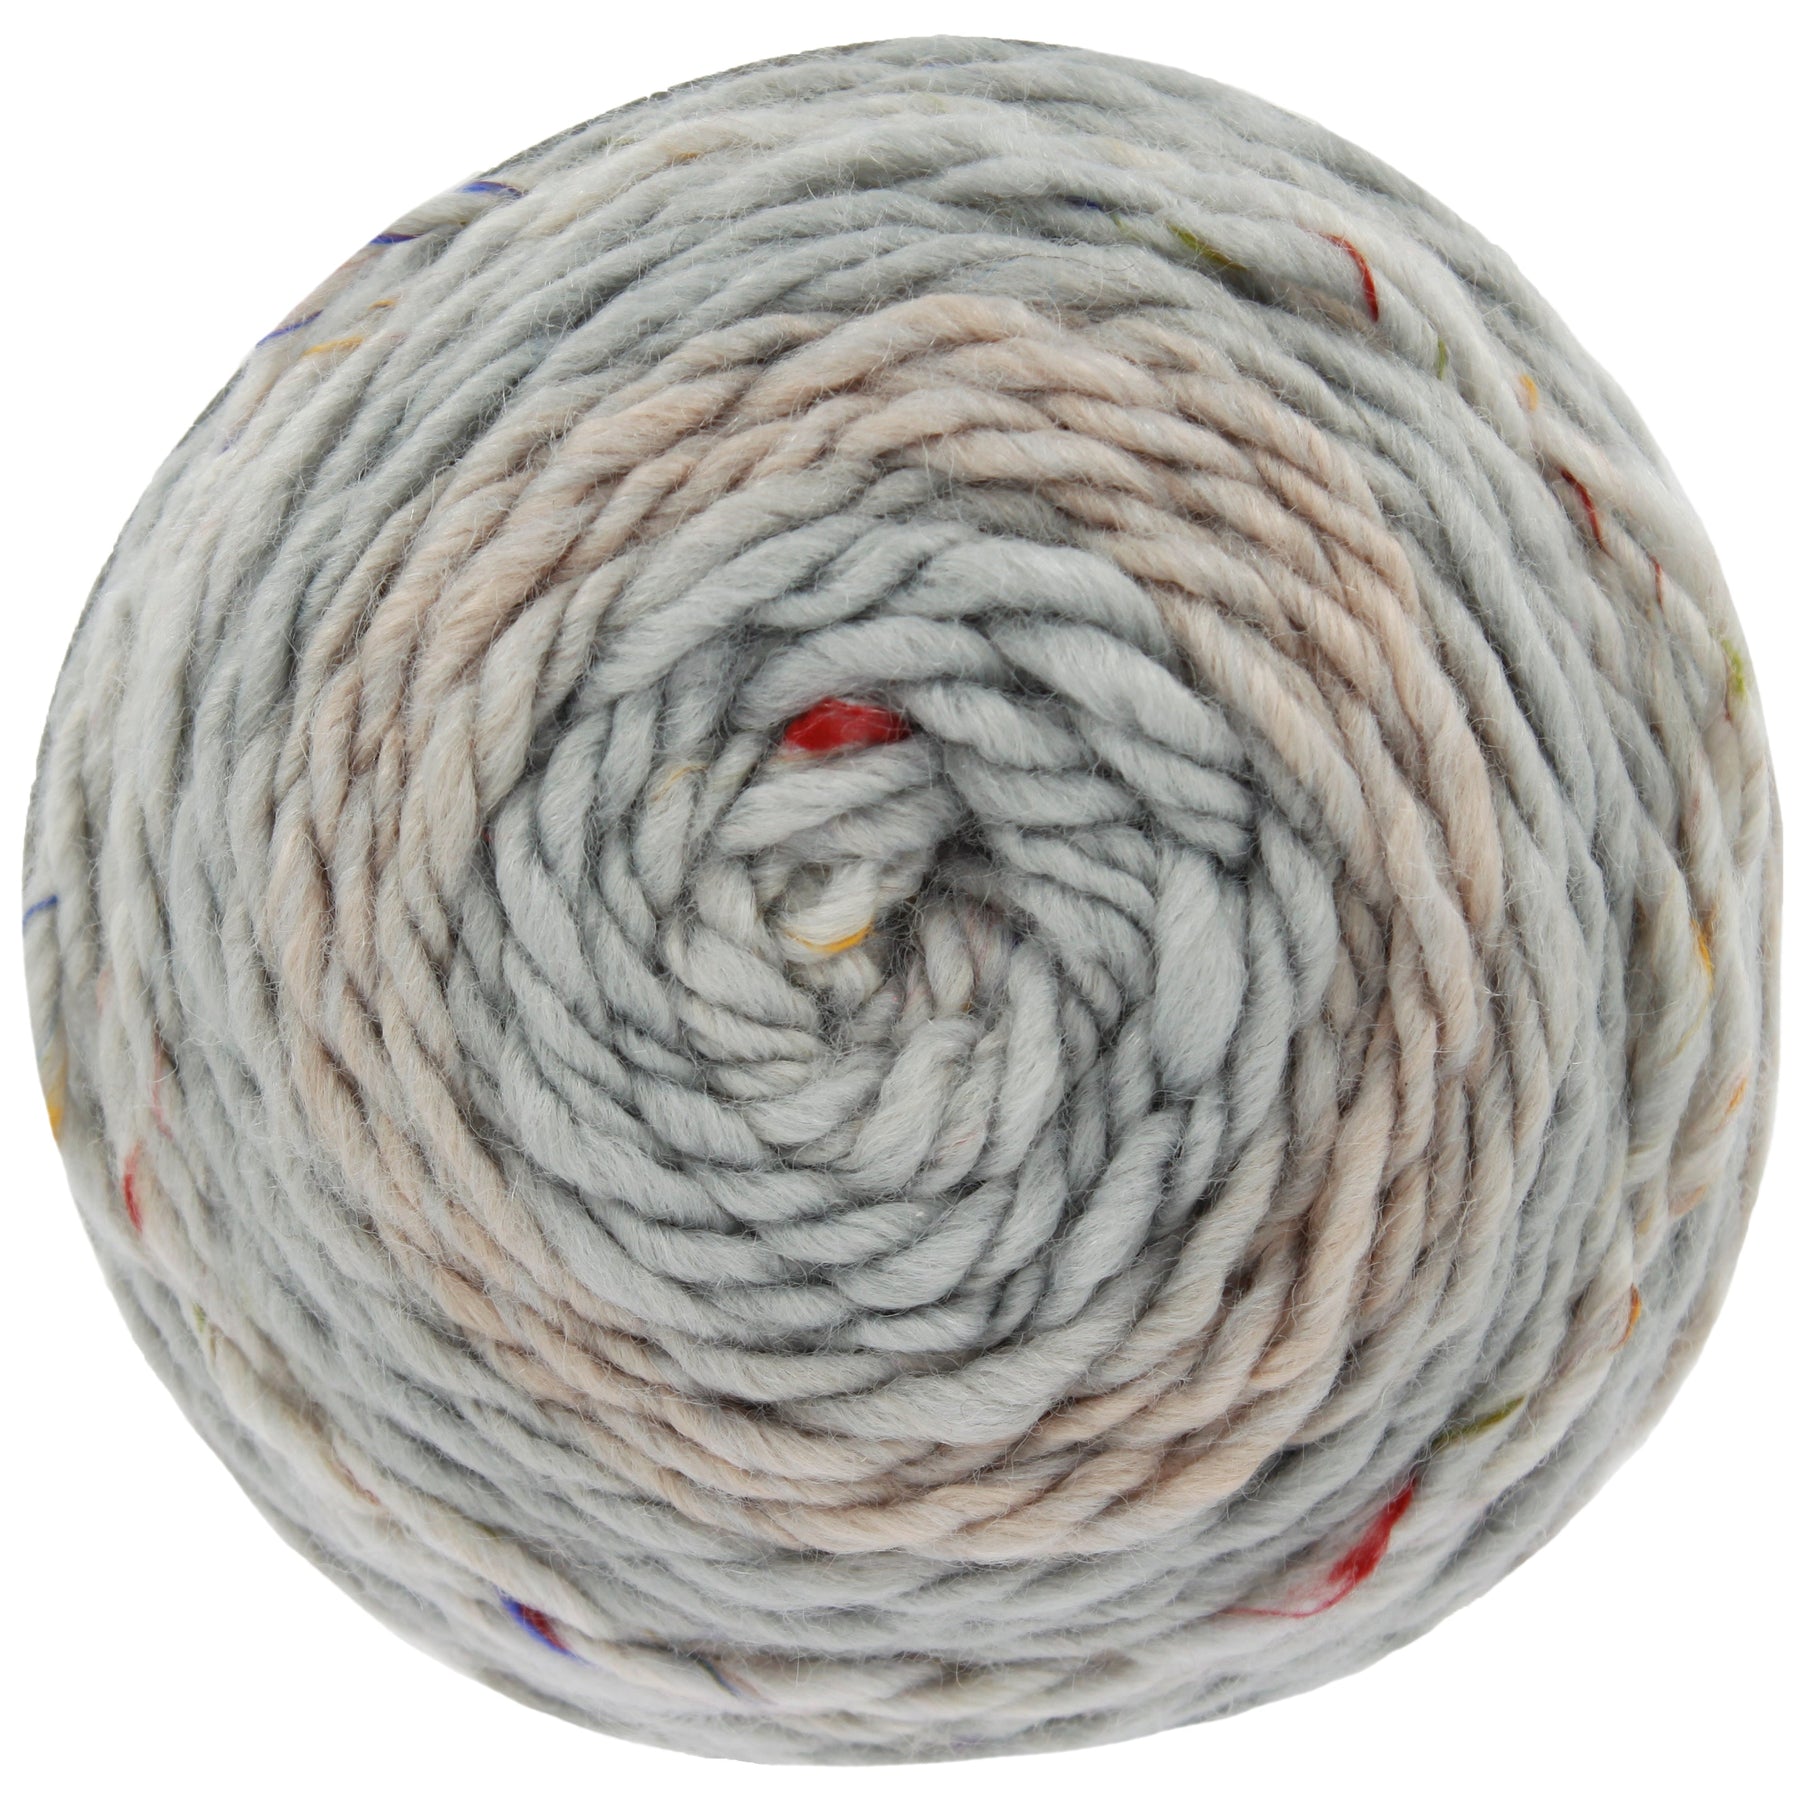 SIX PACK SPECIALS-Twirly Tweed Chunky 4160 Marshmallow The Wool Queen The Wool Queen